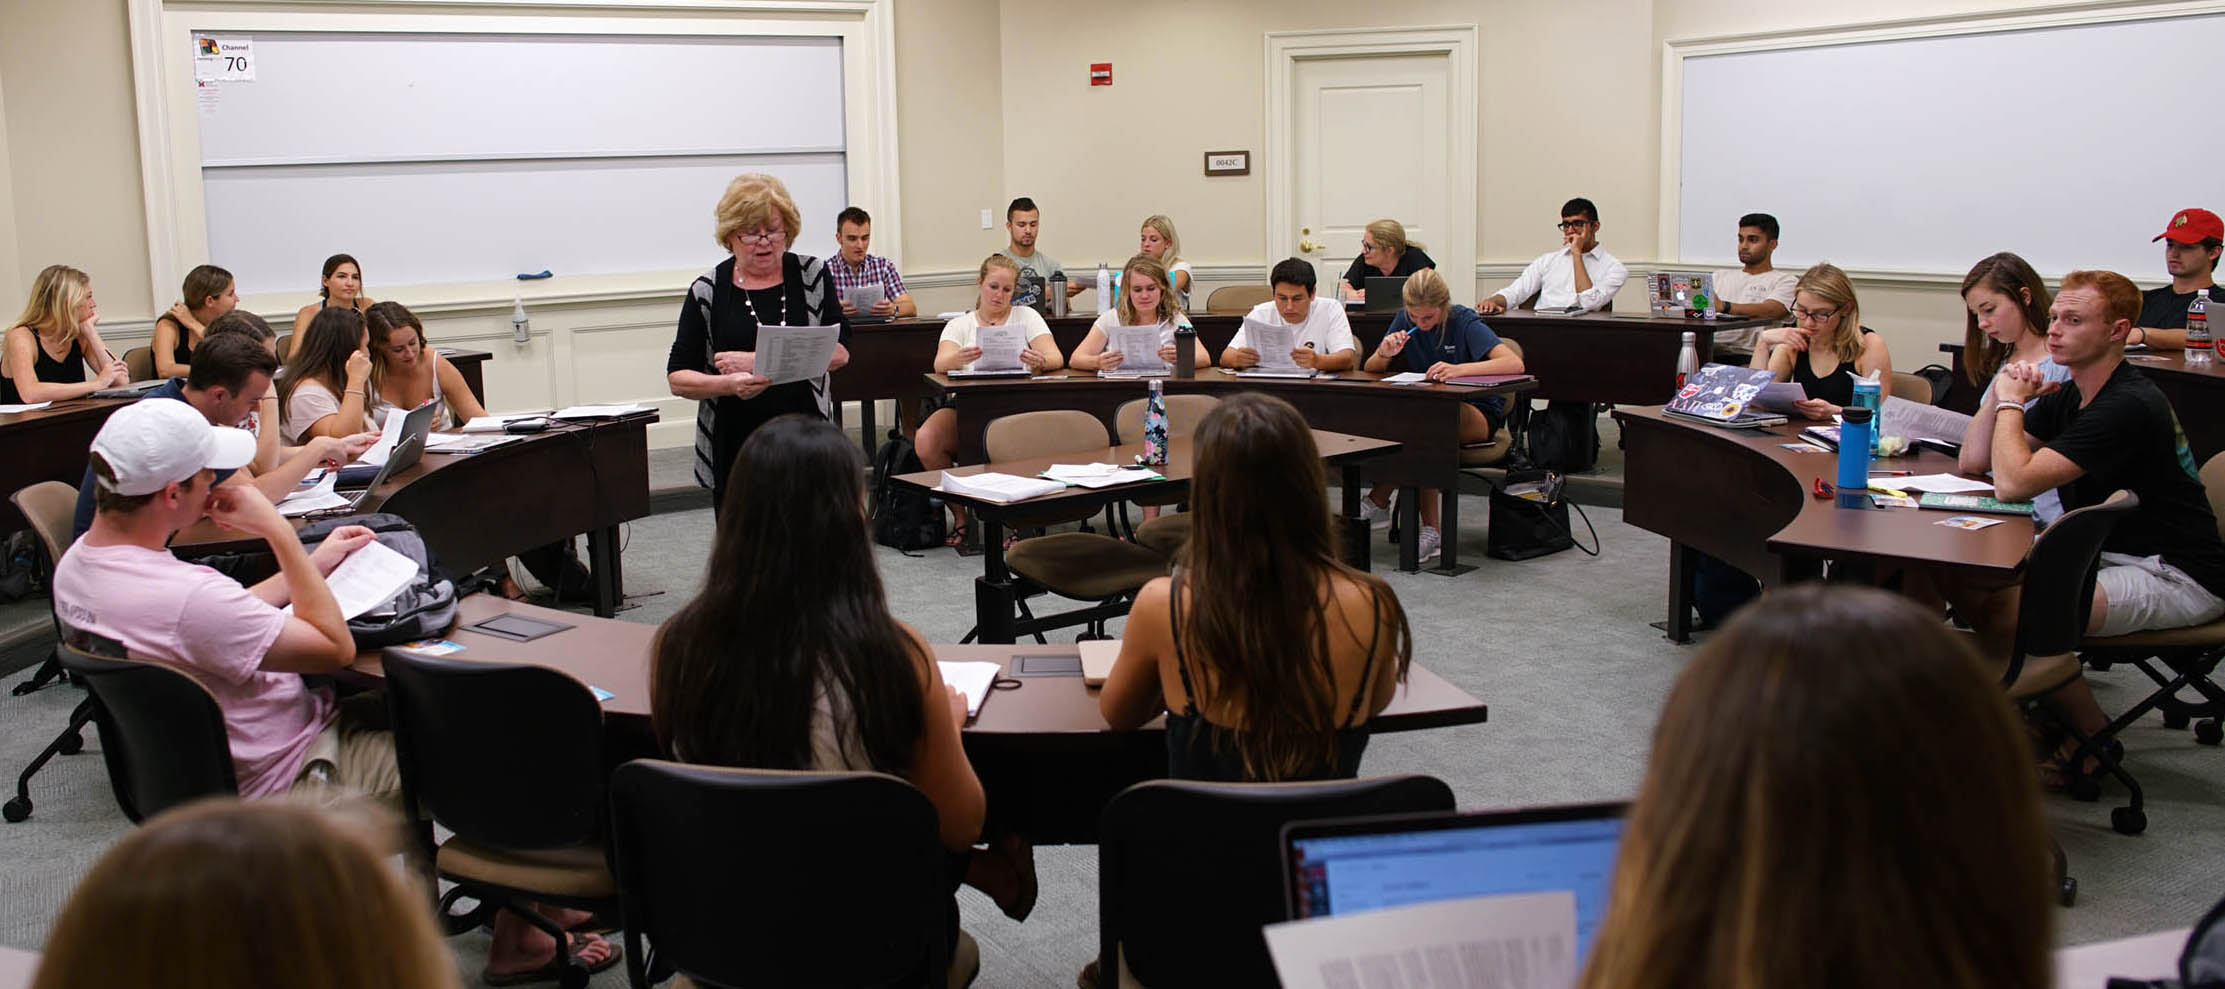  Jan Taylor instructs students about marketing